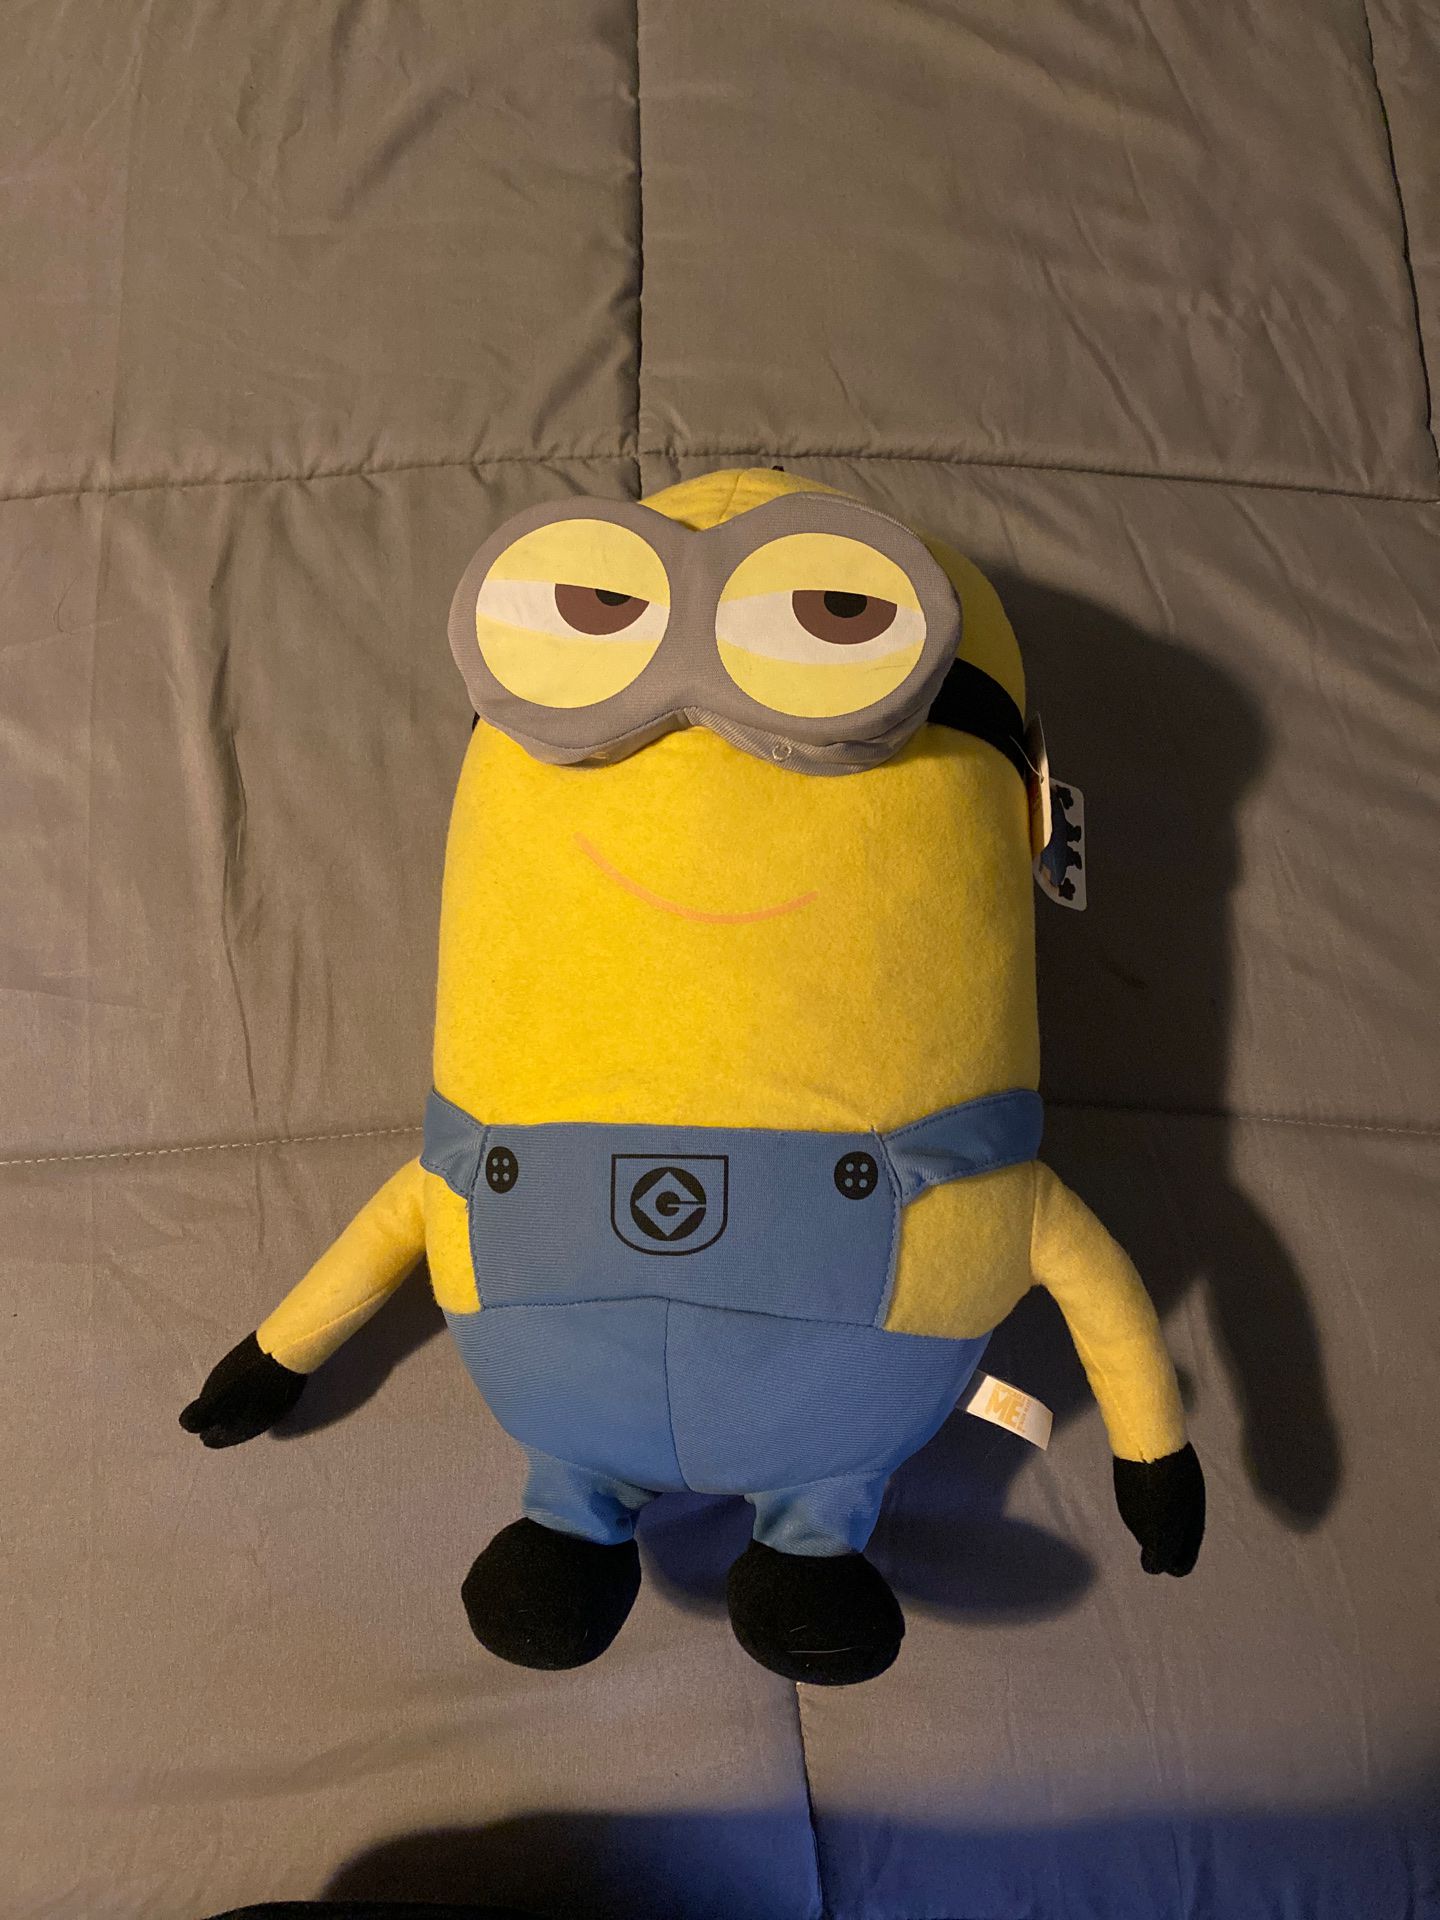 Despicable Me 2 Minions Kevin stuffed animal new 22 inches